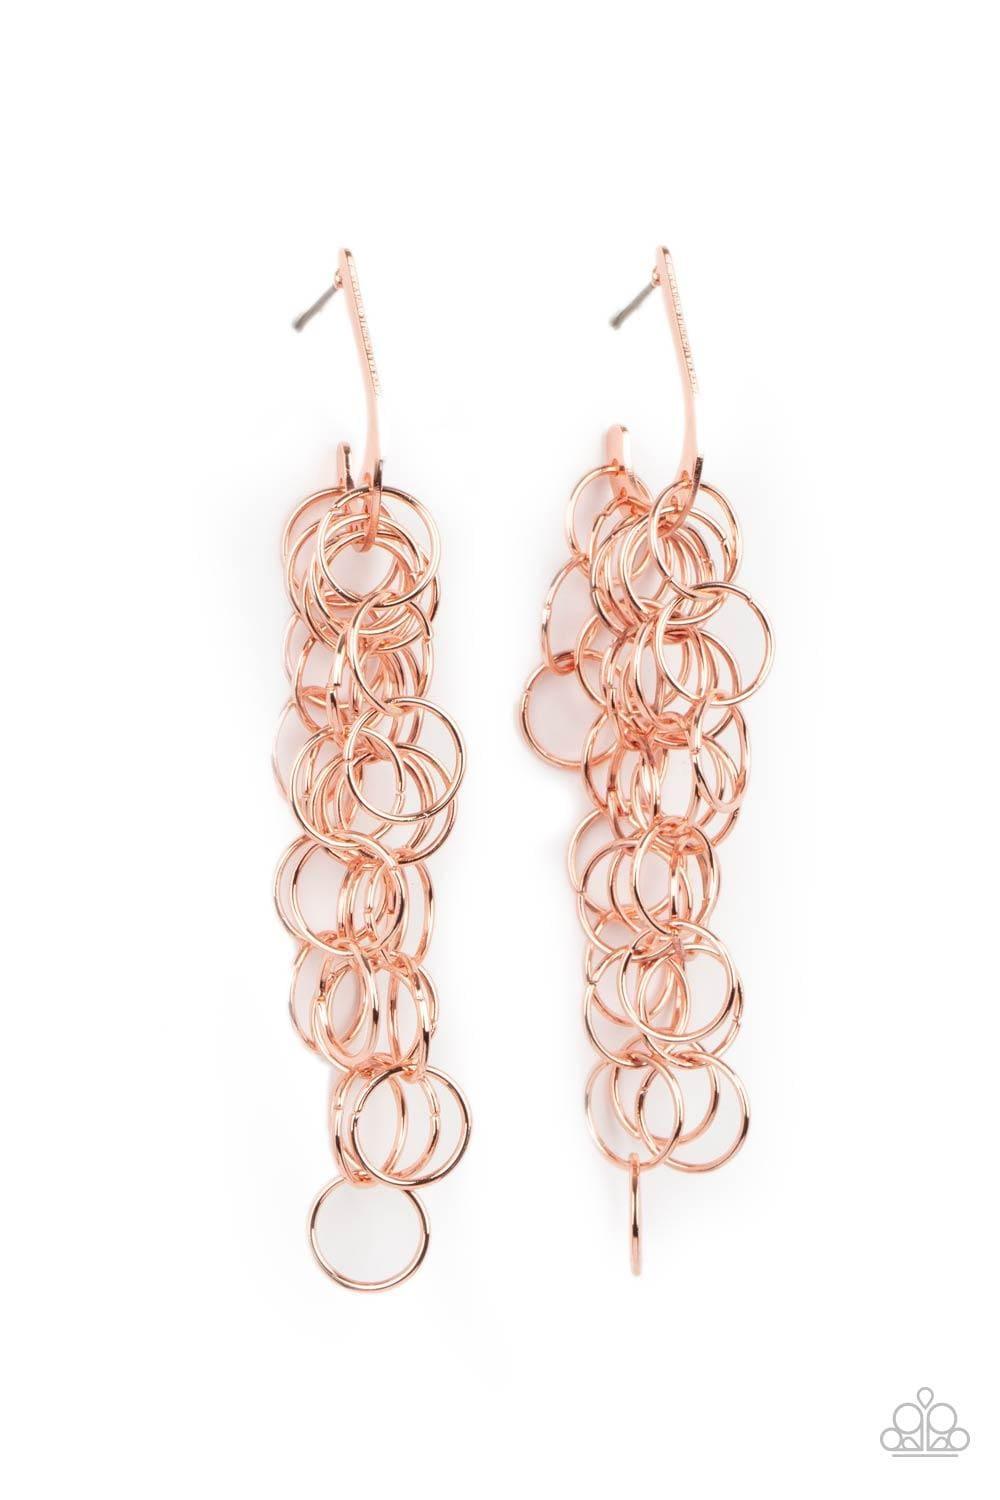 Paparazzi Accessories - Long Live The Rebels - Copper Earrings - Bling by JessieK